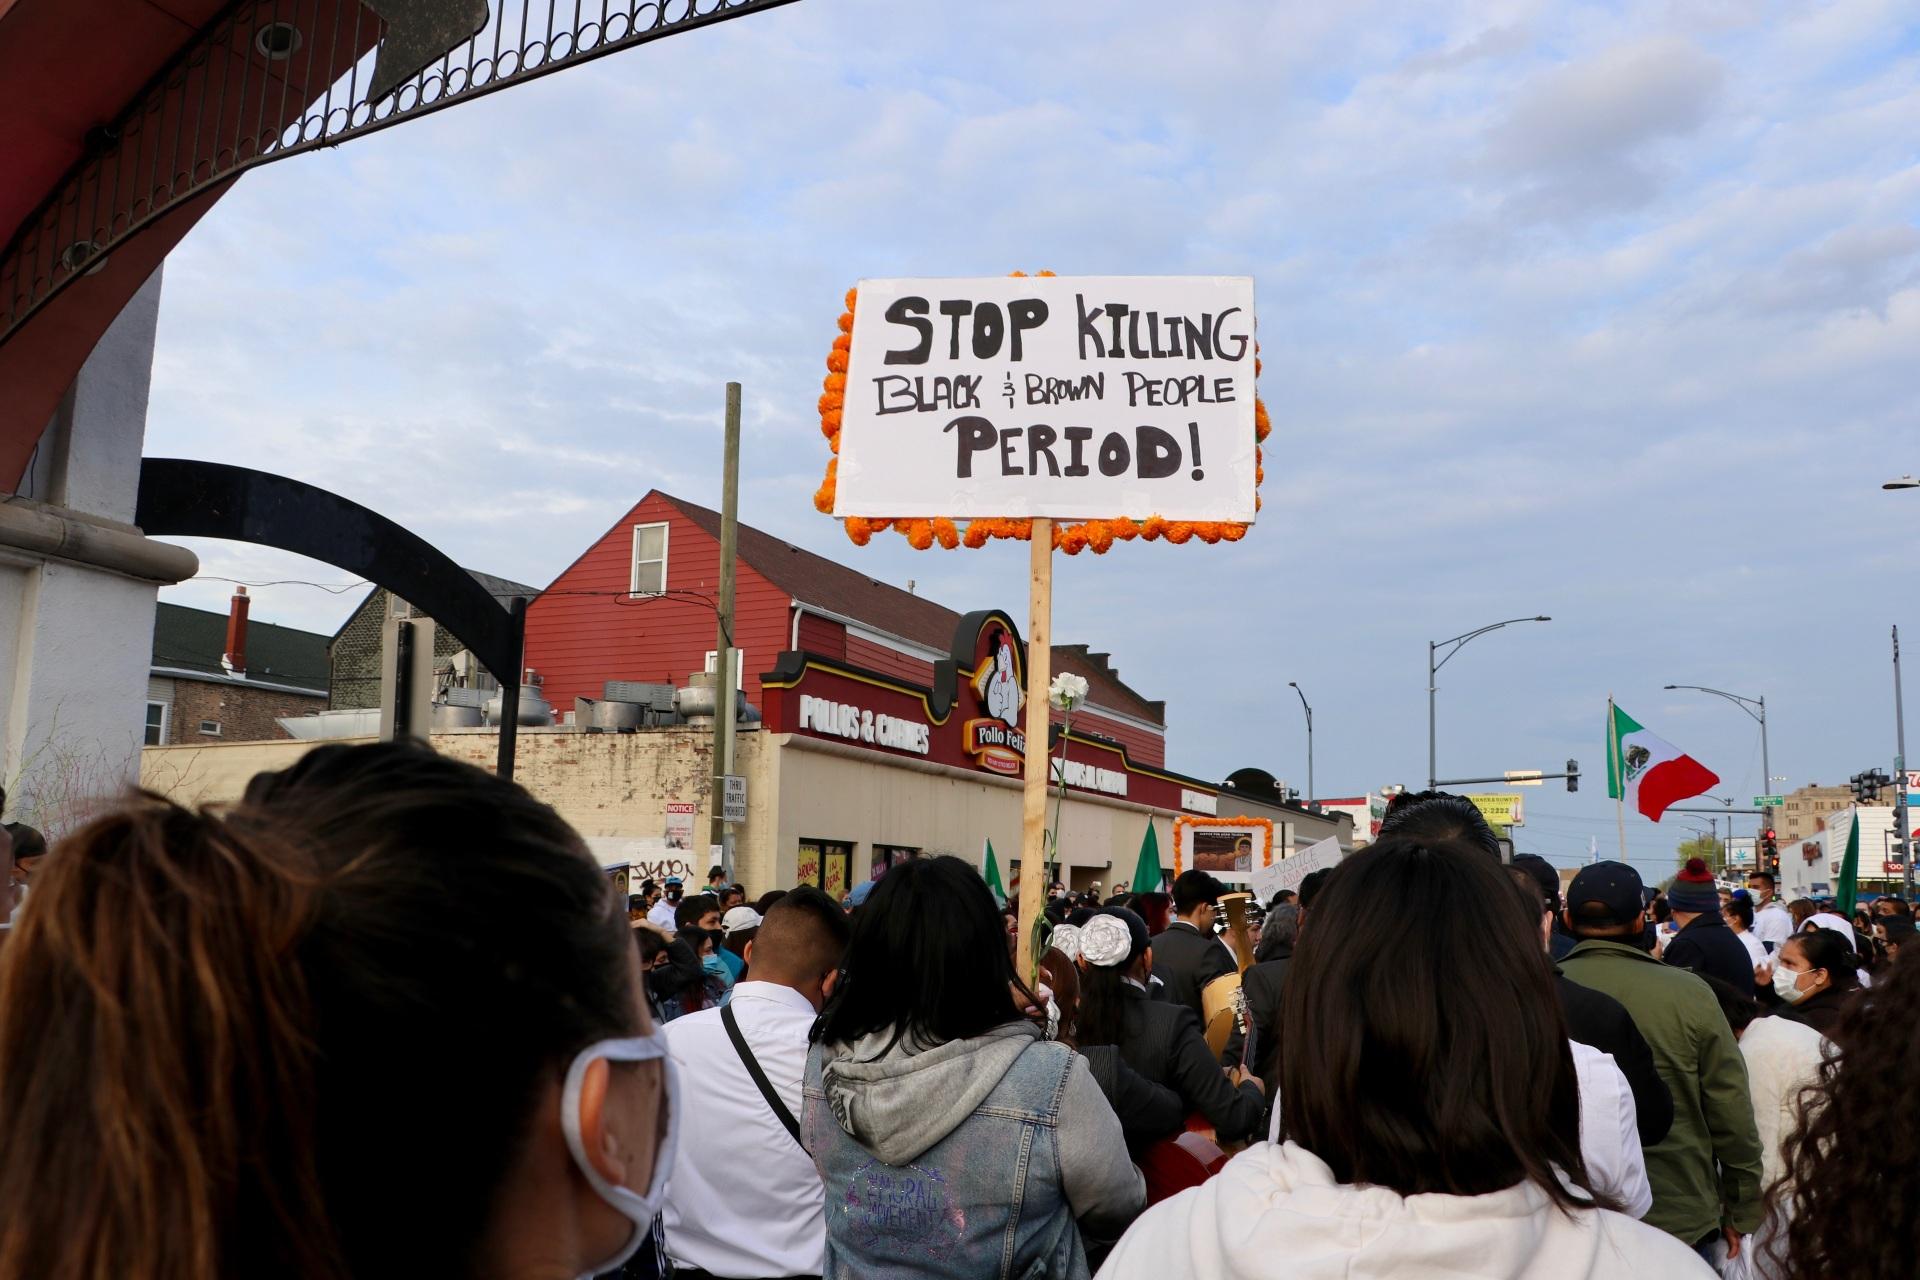 A protester holds a sign reading “Stop Killing Black & Brown People, Period!” while marching at the Adam Toledo peace walk held in Chicago’s Little Village on April 18, 2021. (Evan Garcia / WTTW News)